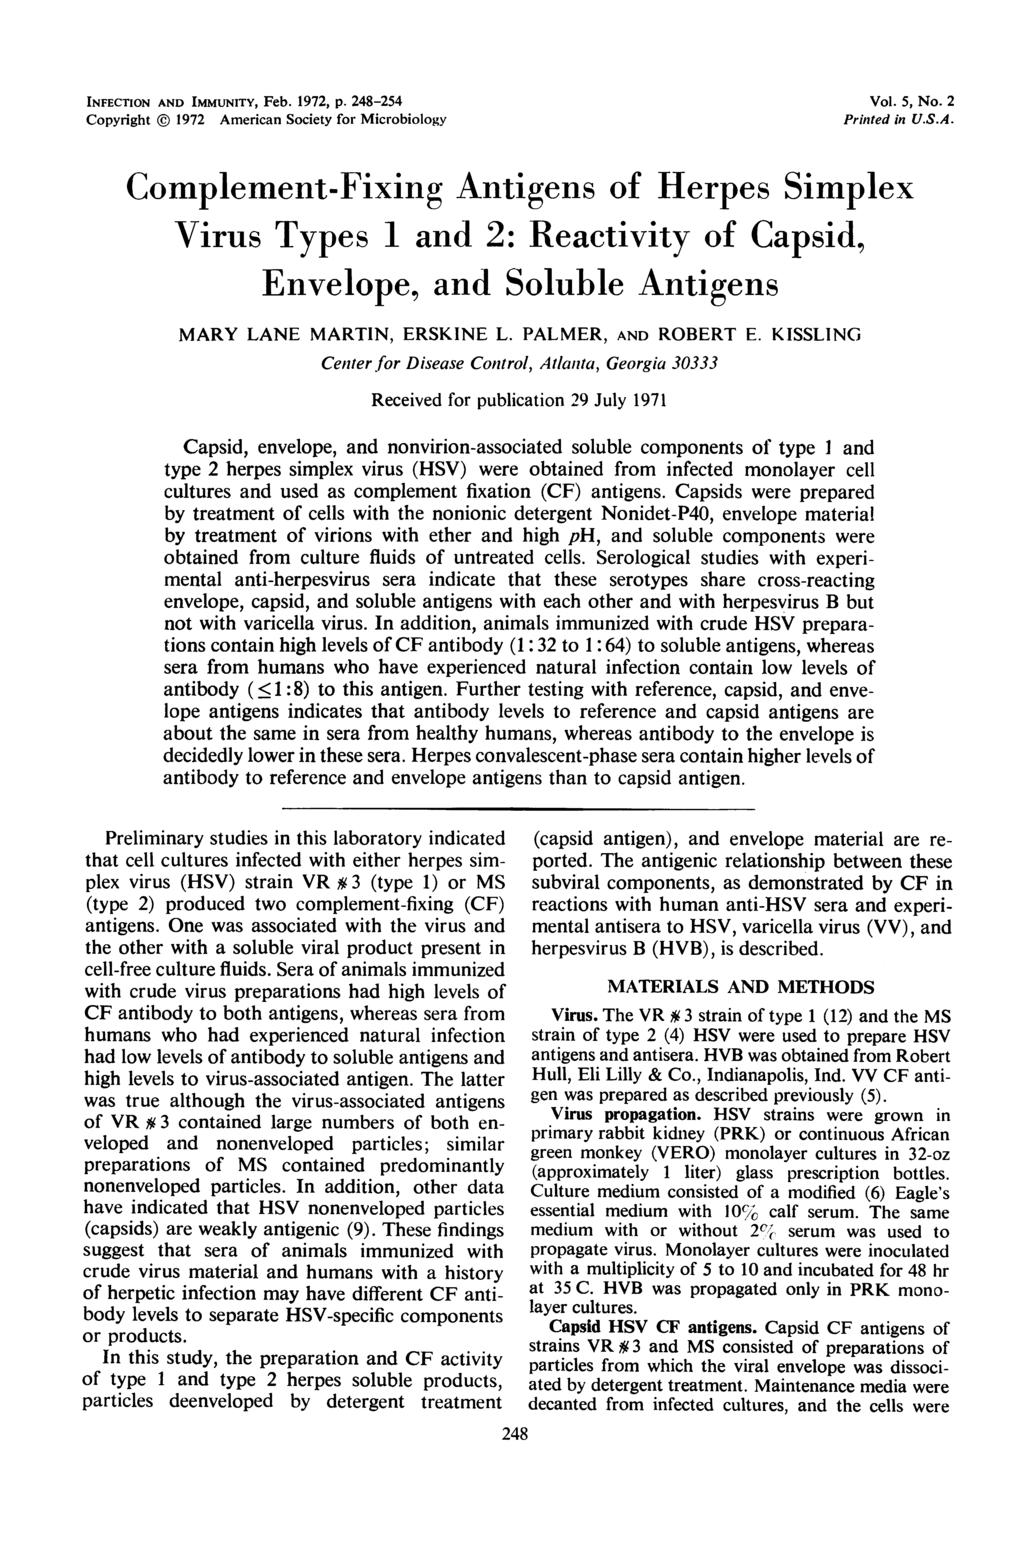 INFECTION AND IMMUNITY, Feb. 1972, p. 248-254 Copyright 1972 American Society for Microbiology Vol. 5, No. 2 Printed in U.S.A. Complement-Fixing Antigens of Herpes Simplex Virus Types 1 and 2: Reactivity of Capsid, Envelope, and Soluble Antigens MARY LANE MARTIN, ERSKINE L.